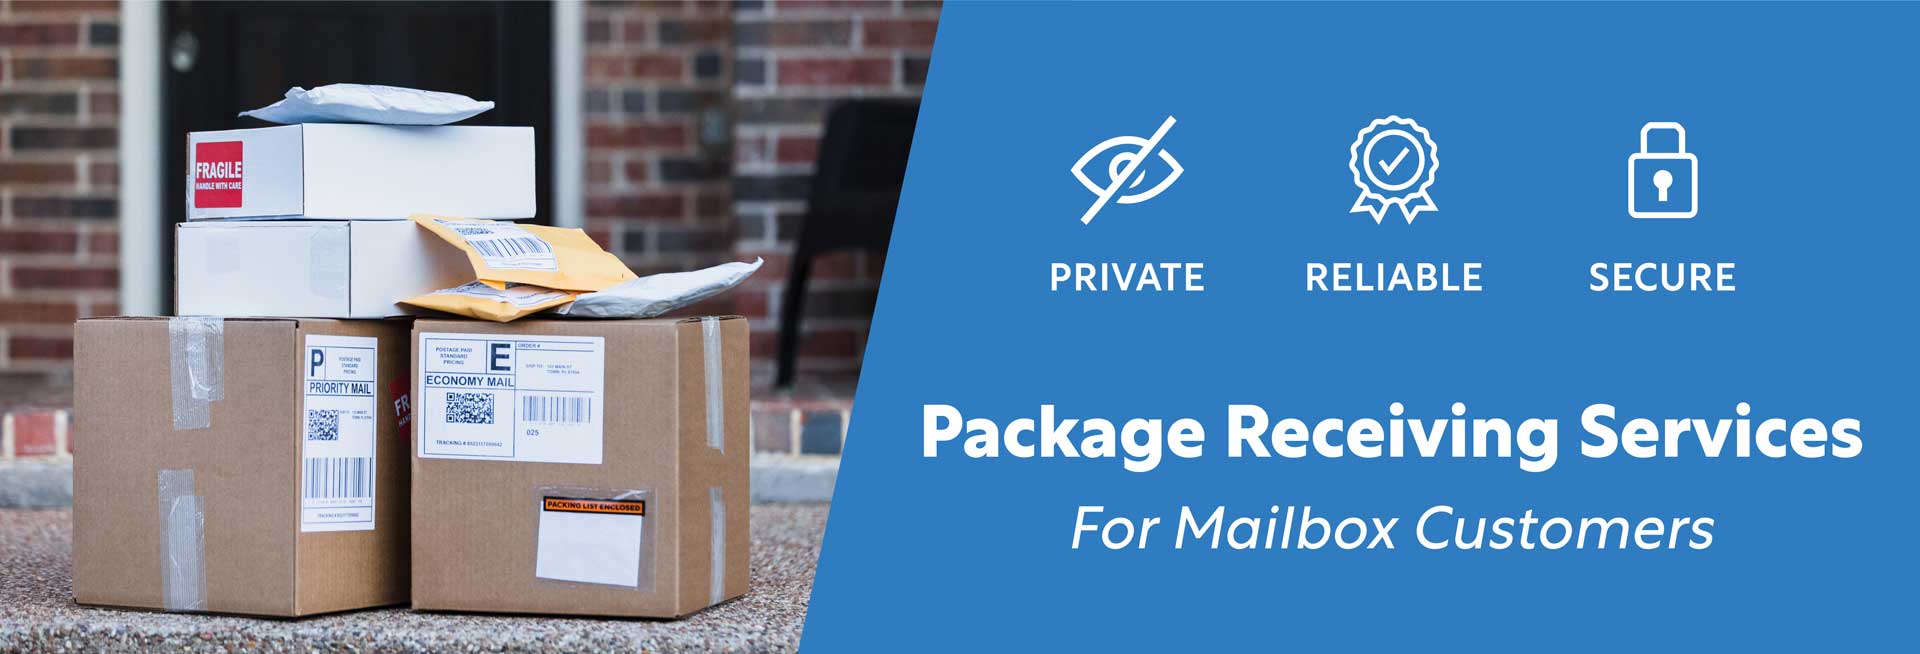 Package Receiving Services in Cardiff by the Sea